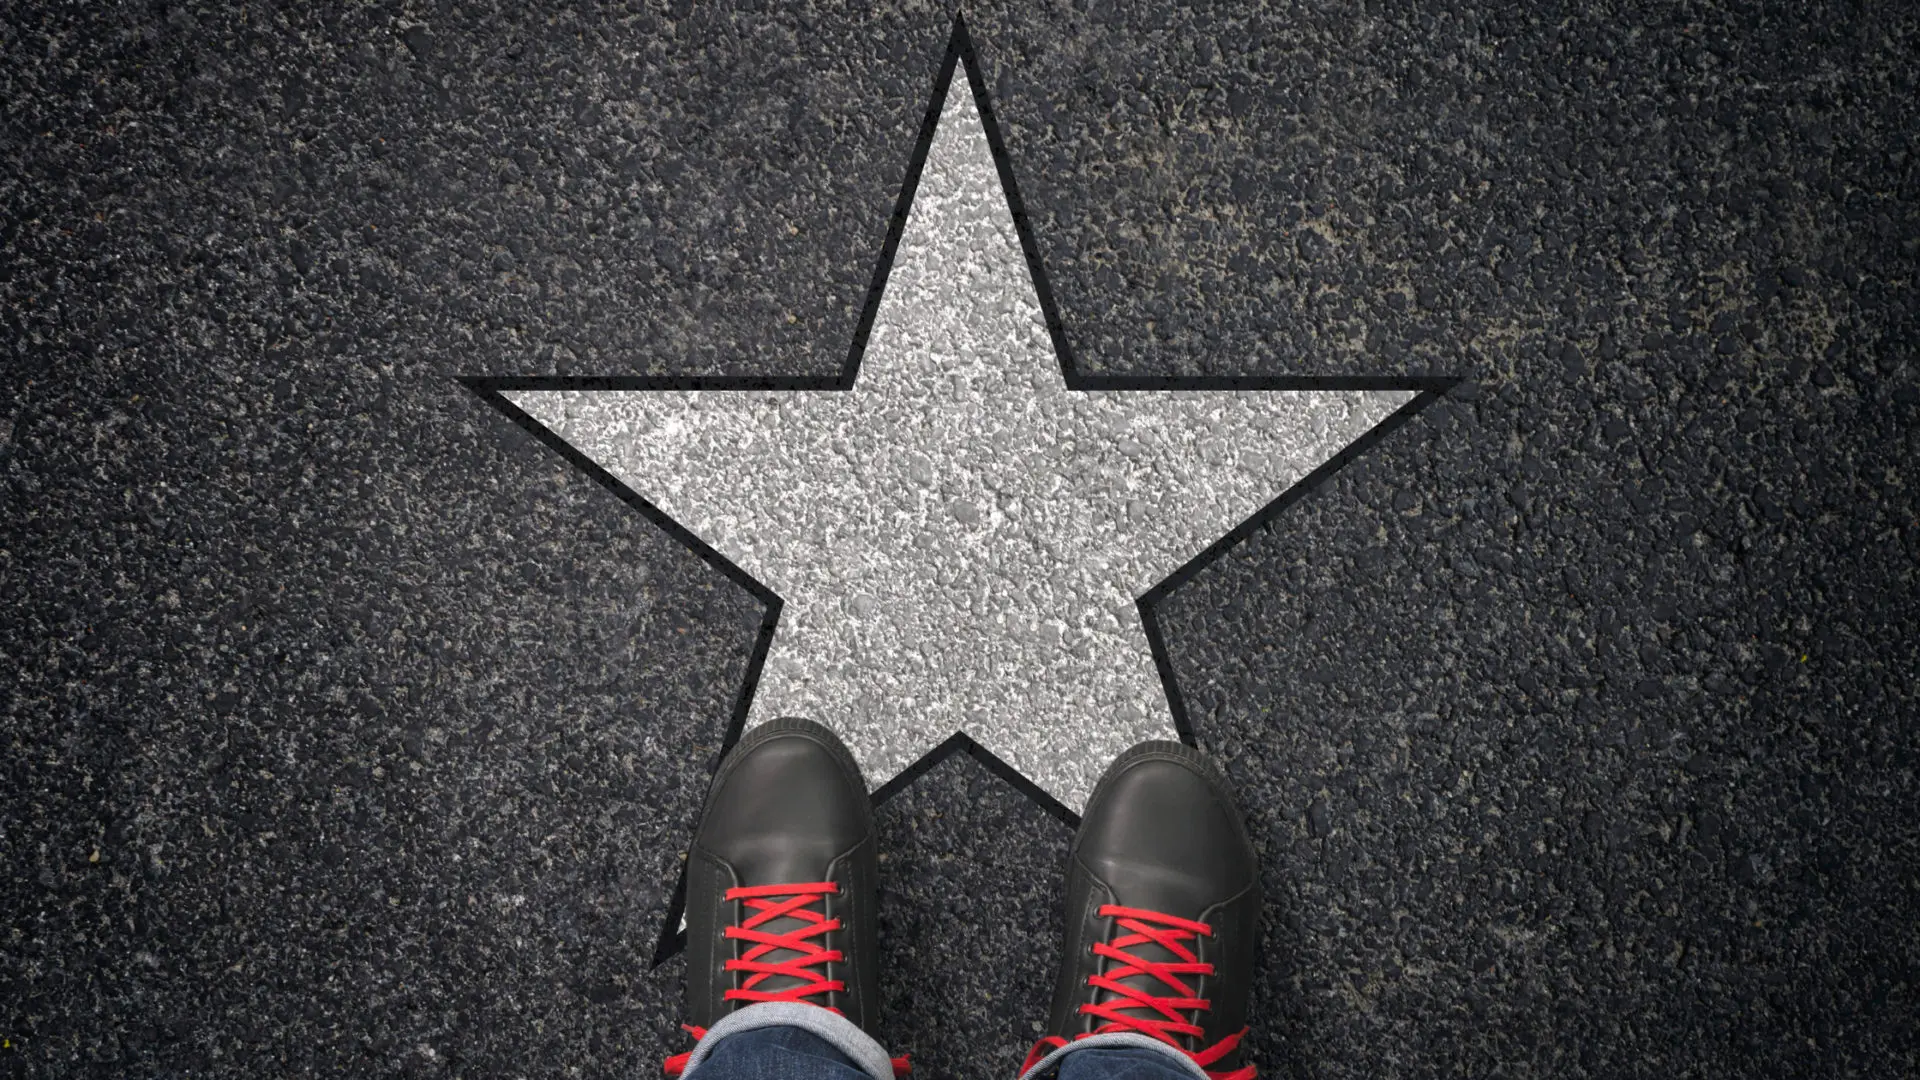 Keep star performers engaged through employee development opportunities